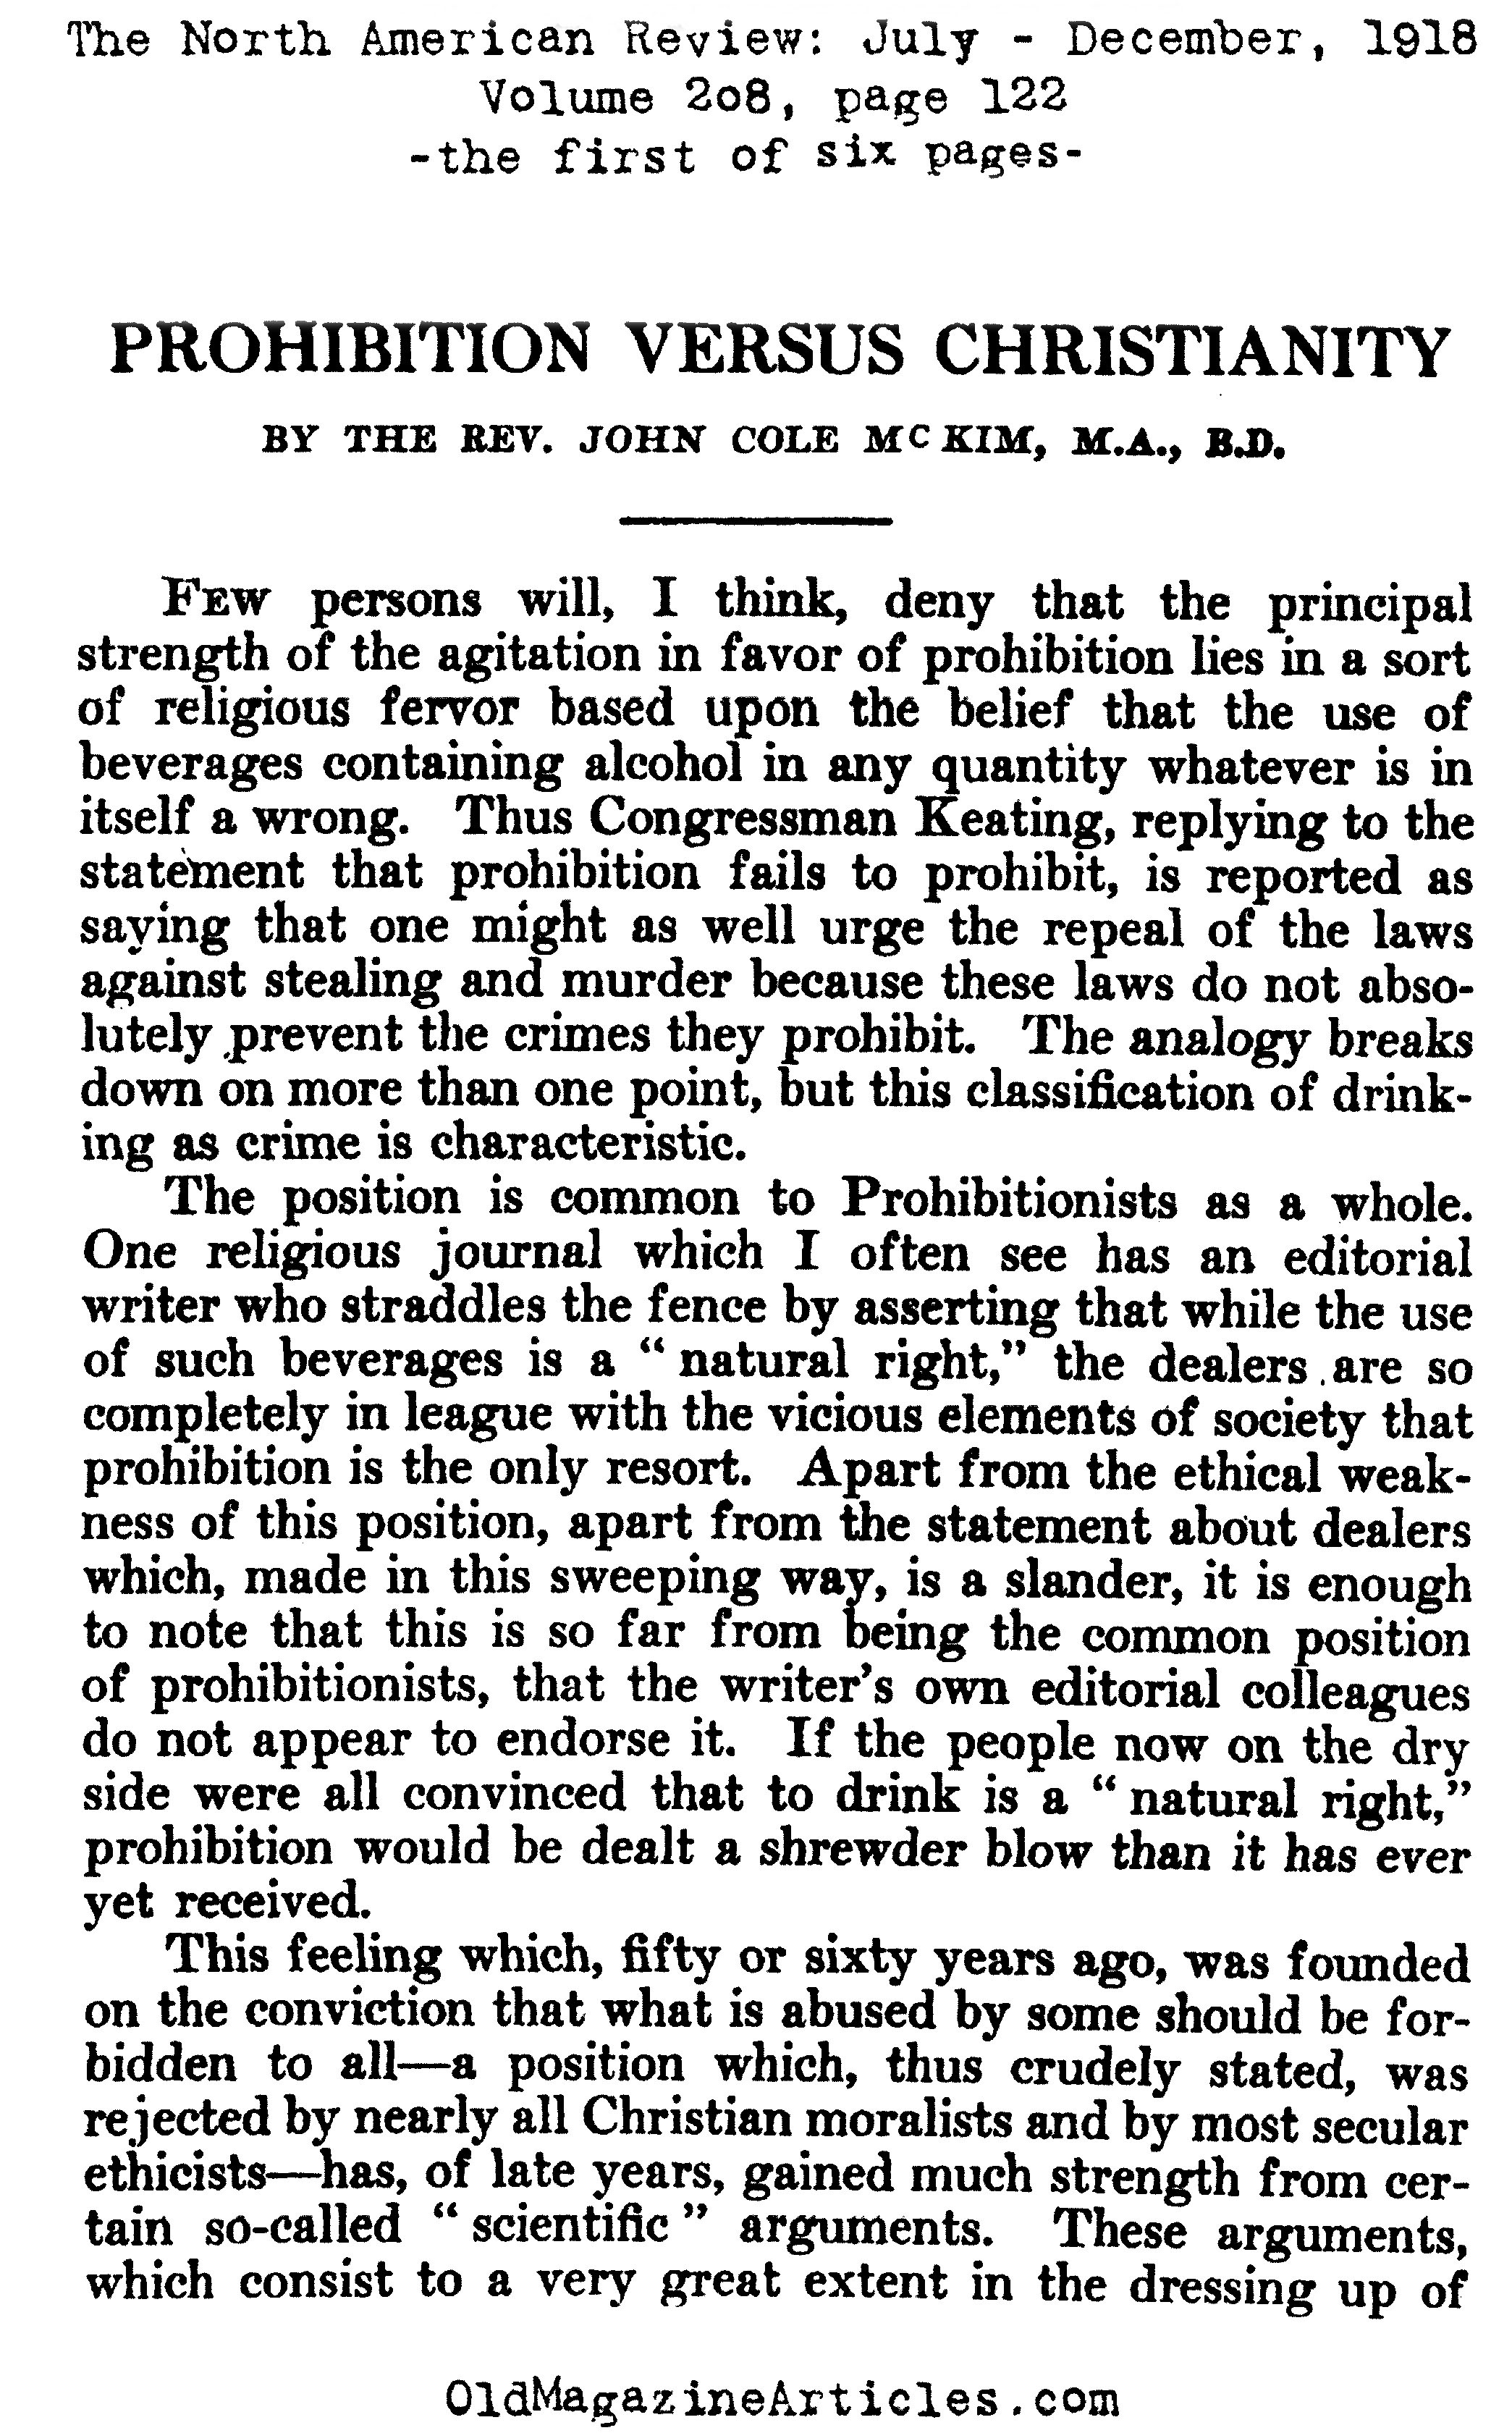 Christianity vs. Prohibition  (The North American Review, 1918)